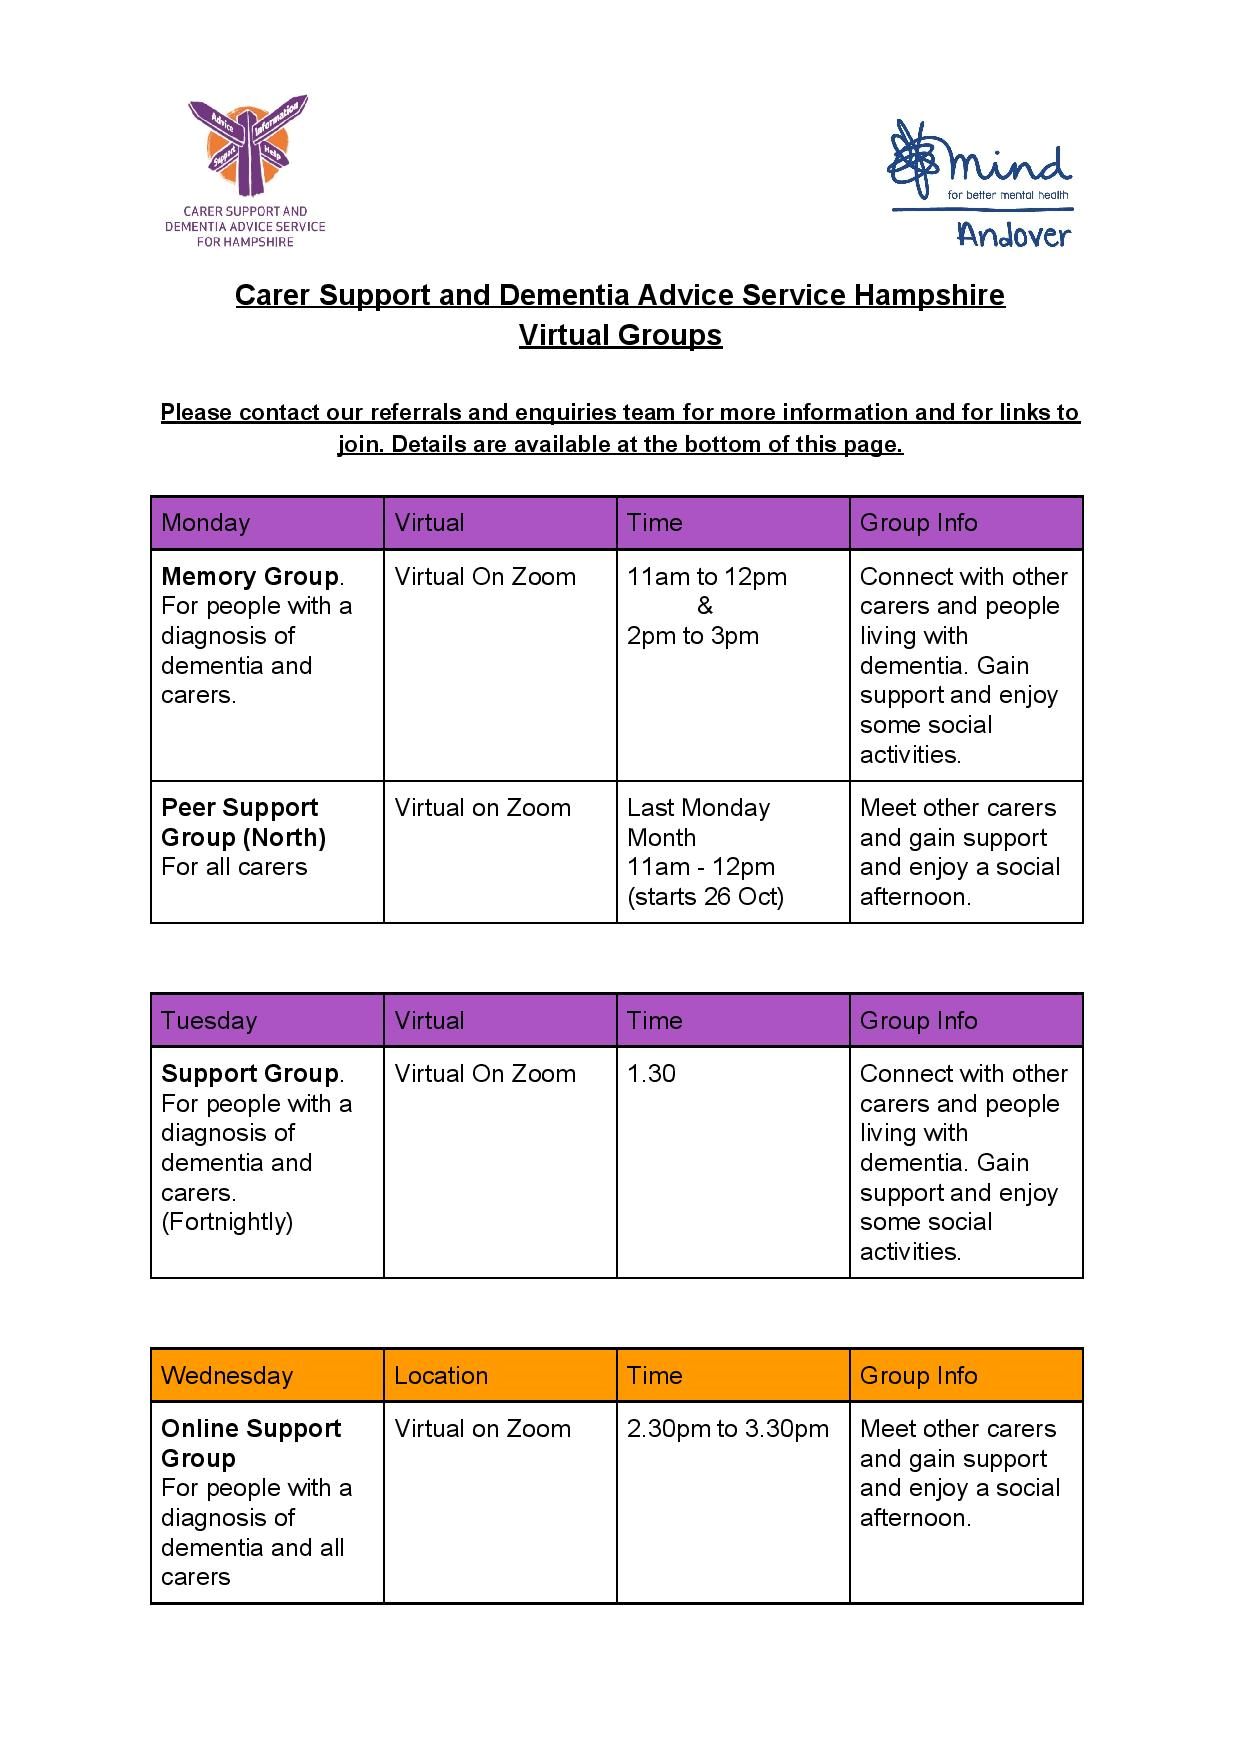 Carer Support and DA Virtual Groups